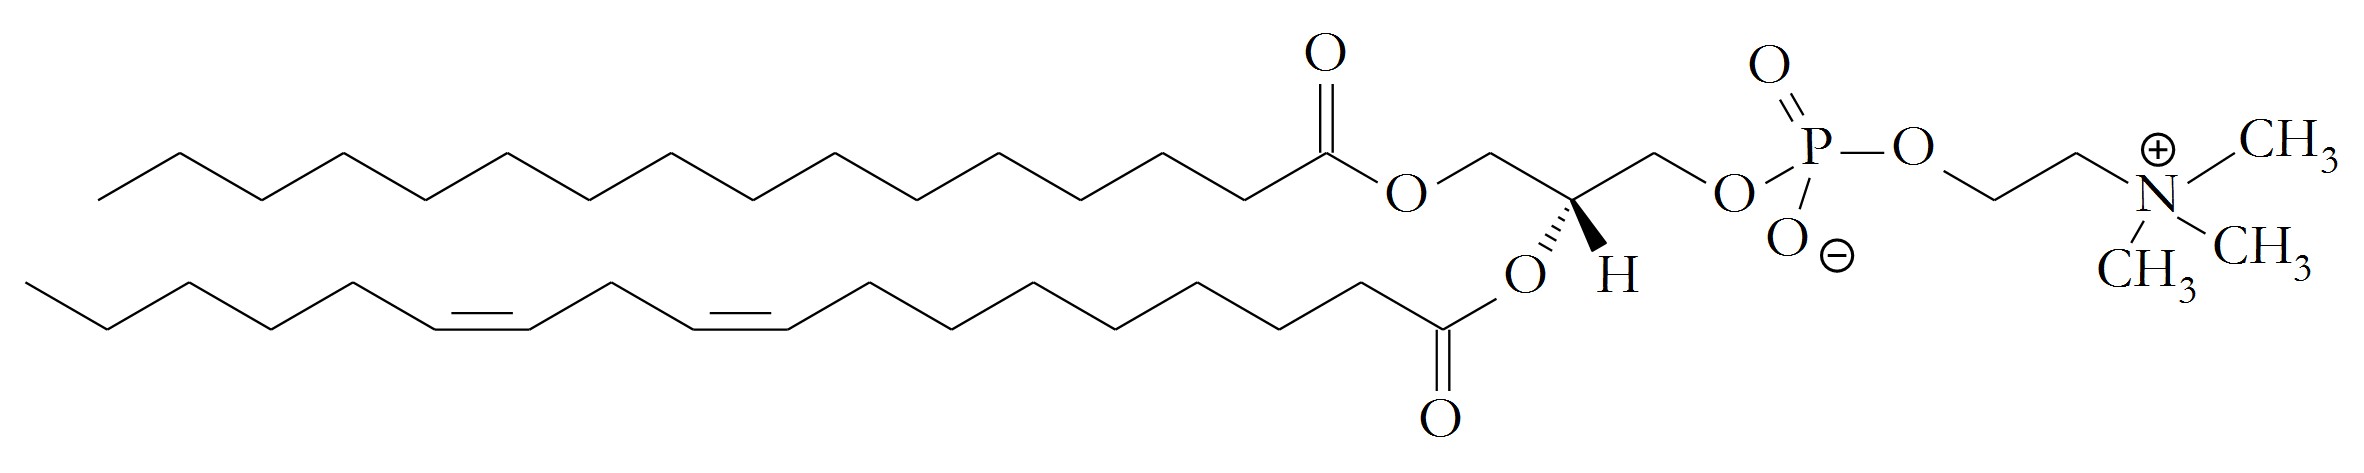 PC molecule with chemically bound linoleic acid and palmitic acid